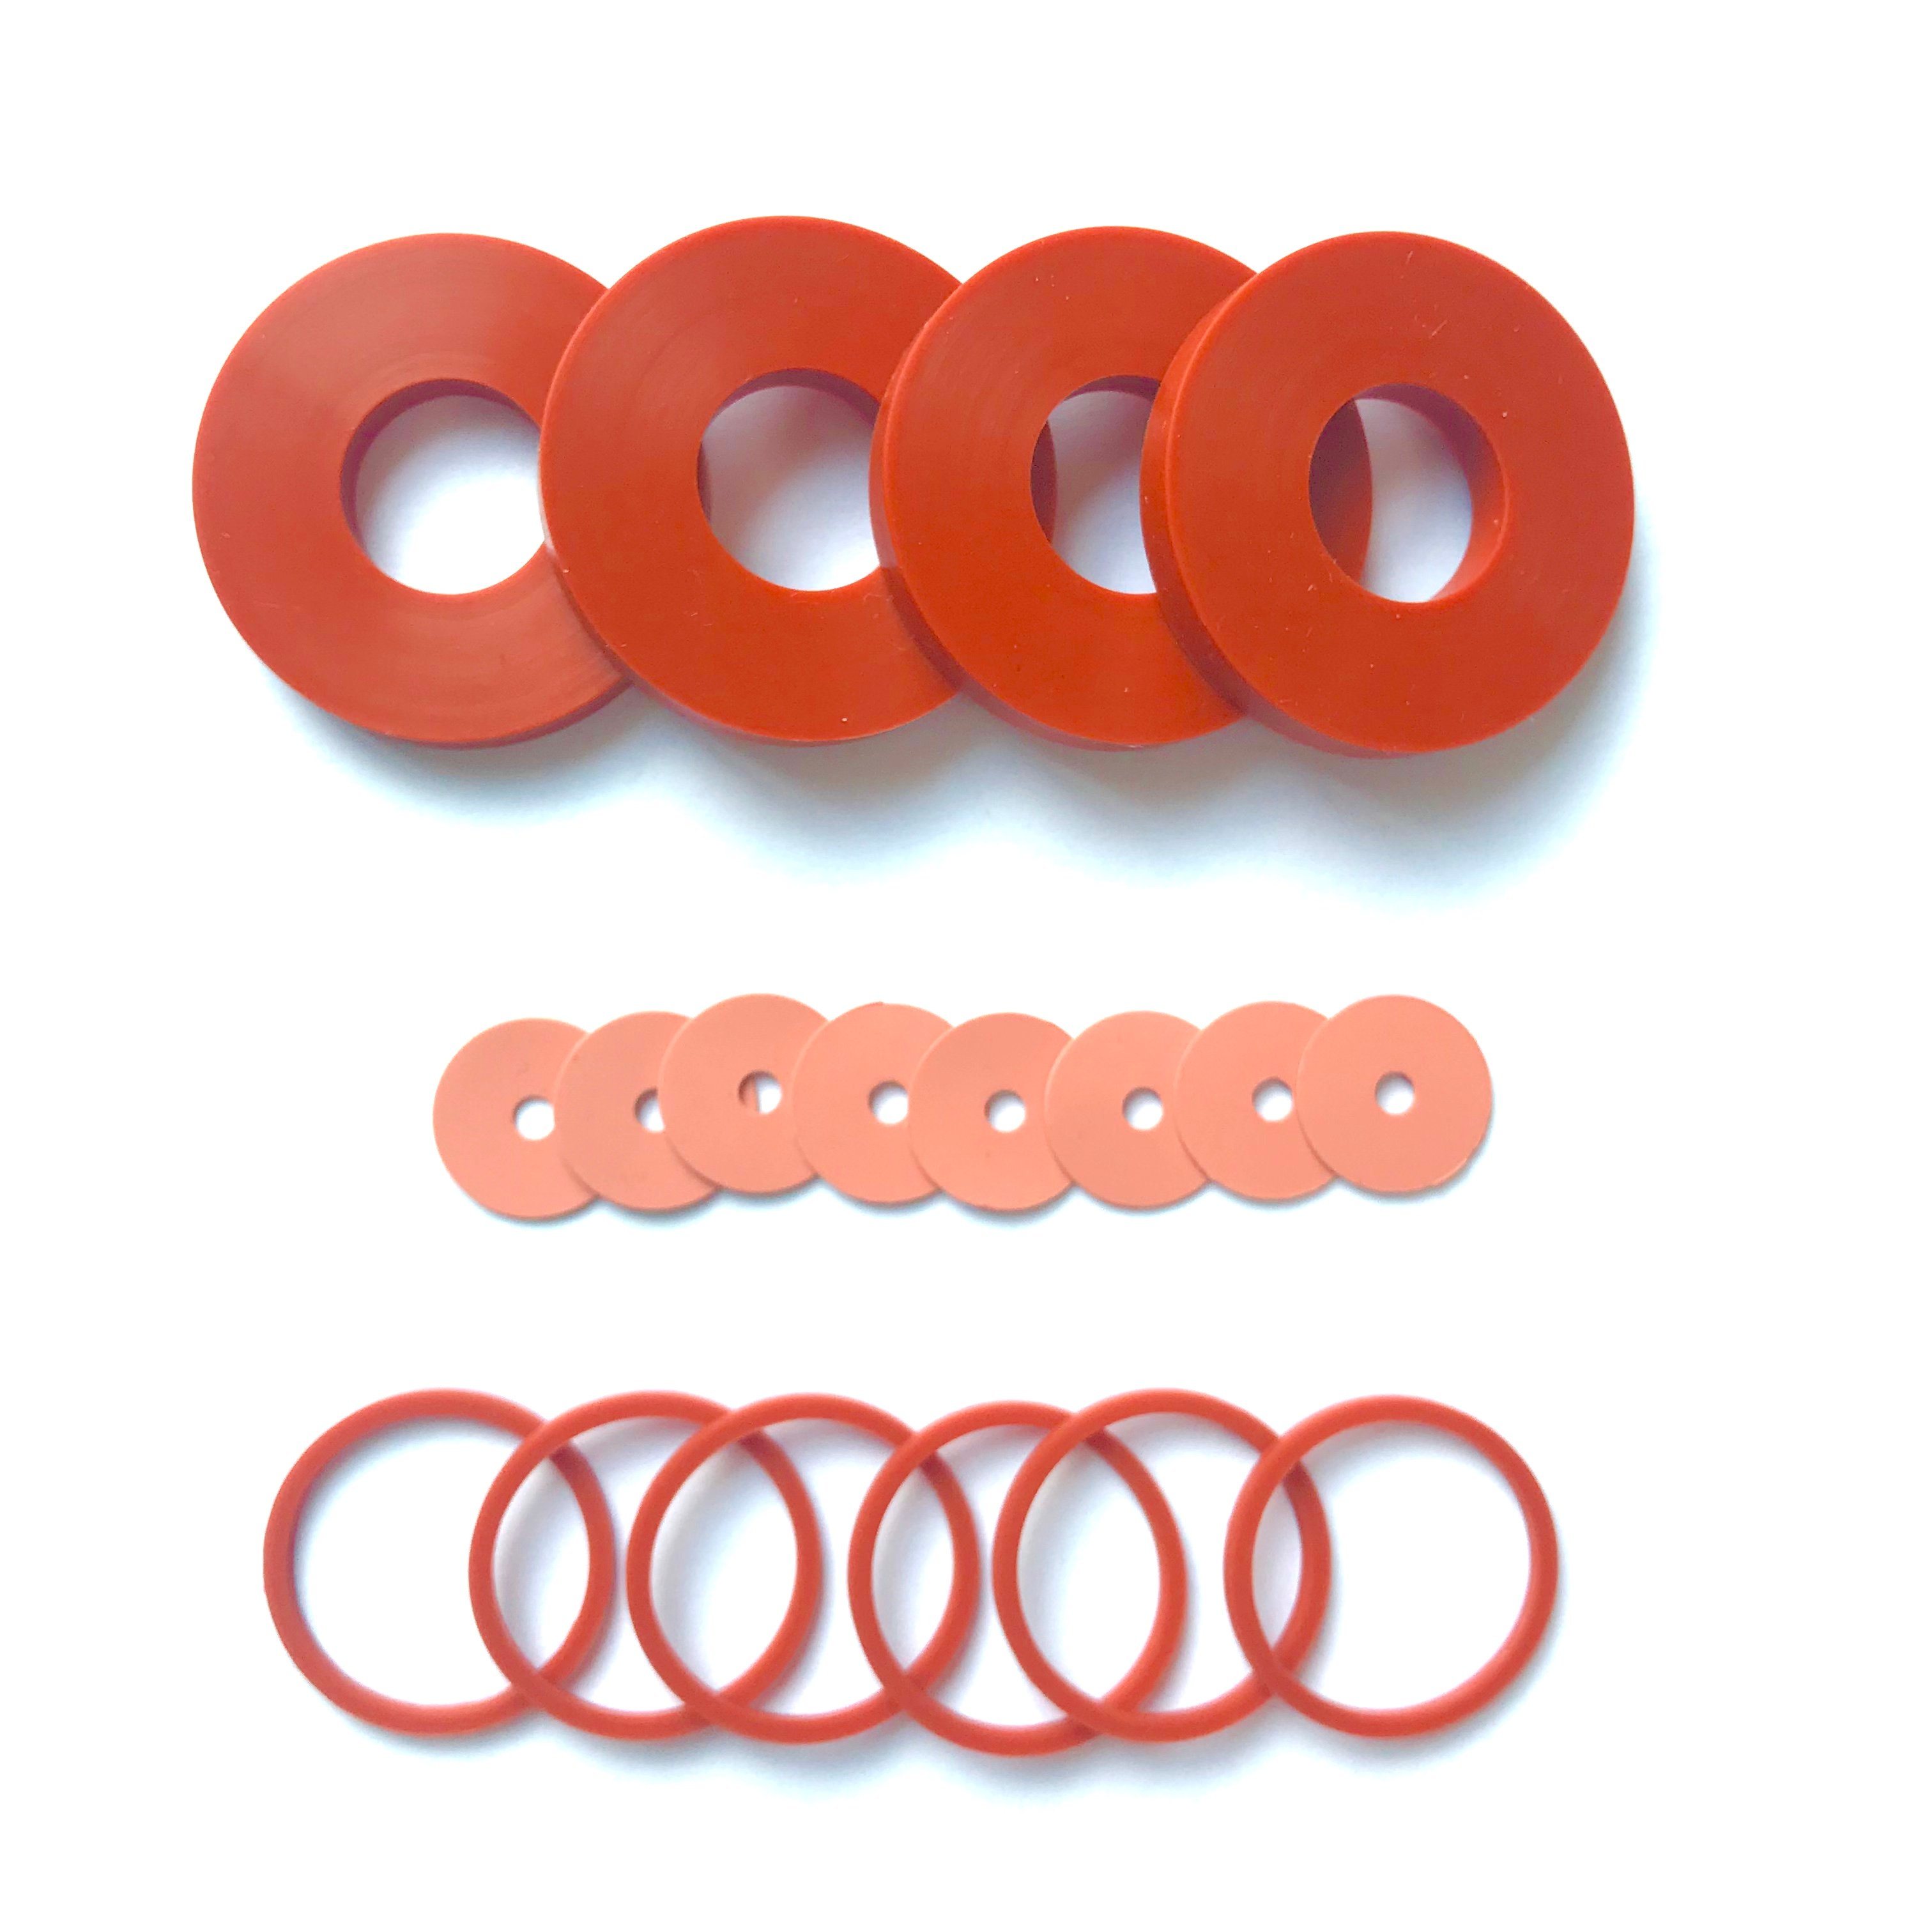 Customized OEM/ODM Industry Bonded Acm/Cr/EPDM/FDA Silicone Rubber Spiral Wound Sheet Sealing Gasket